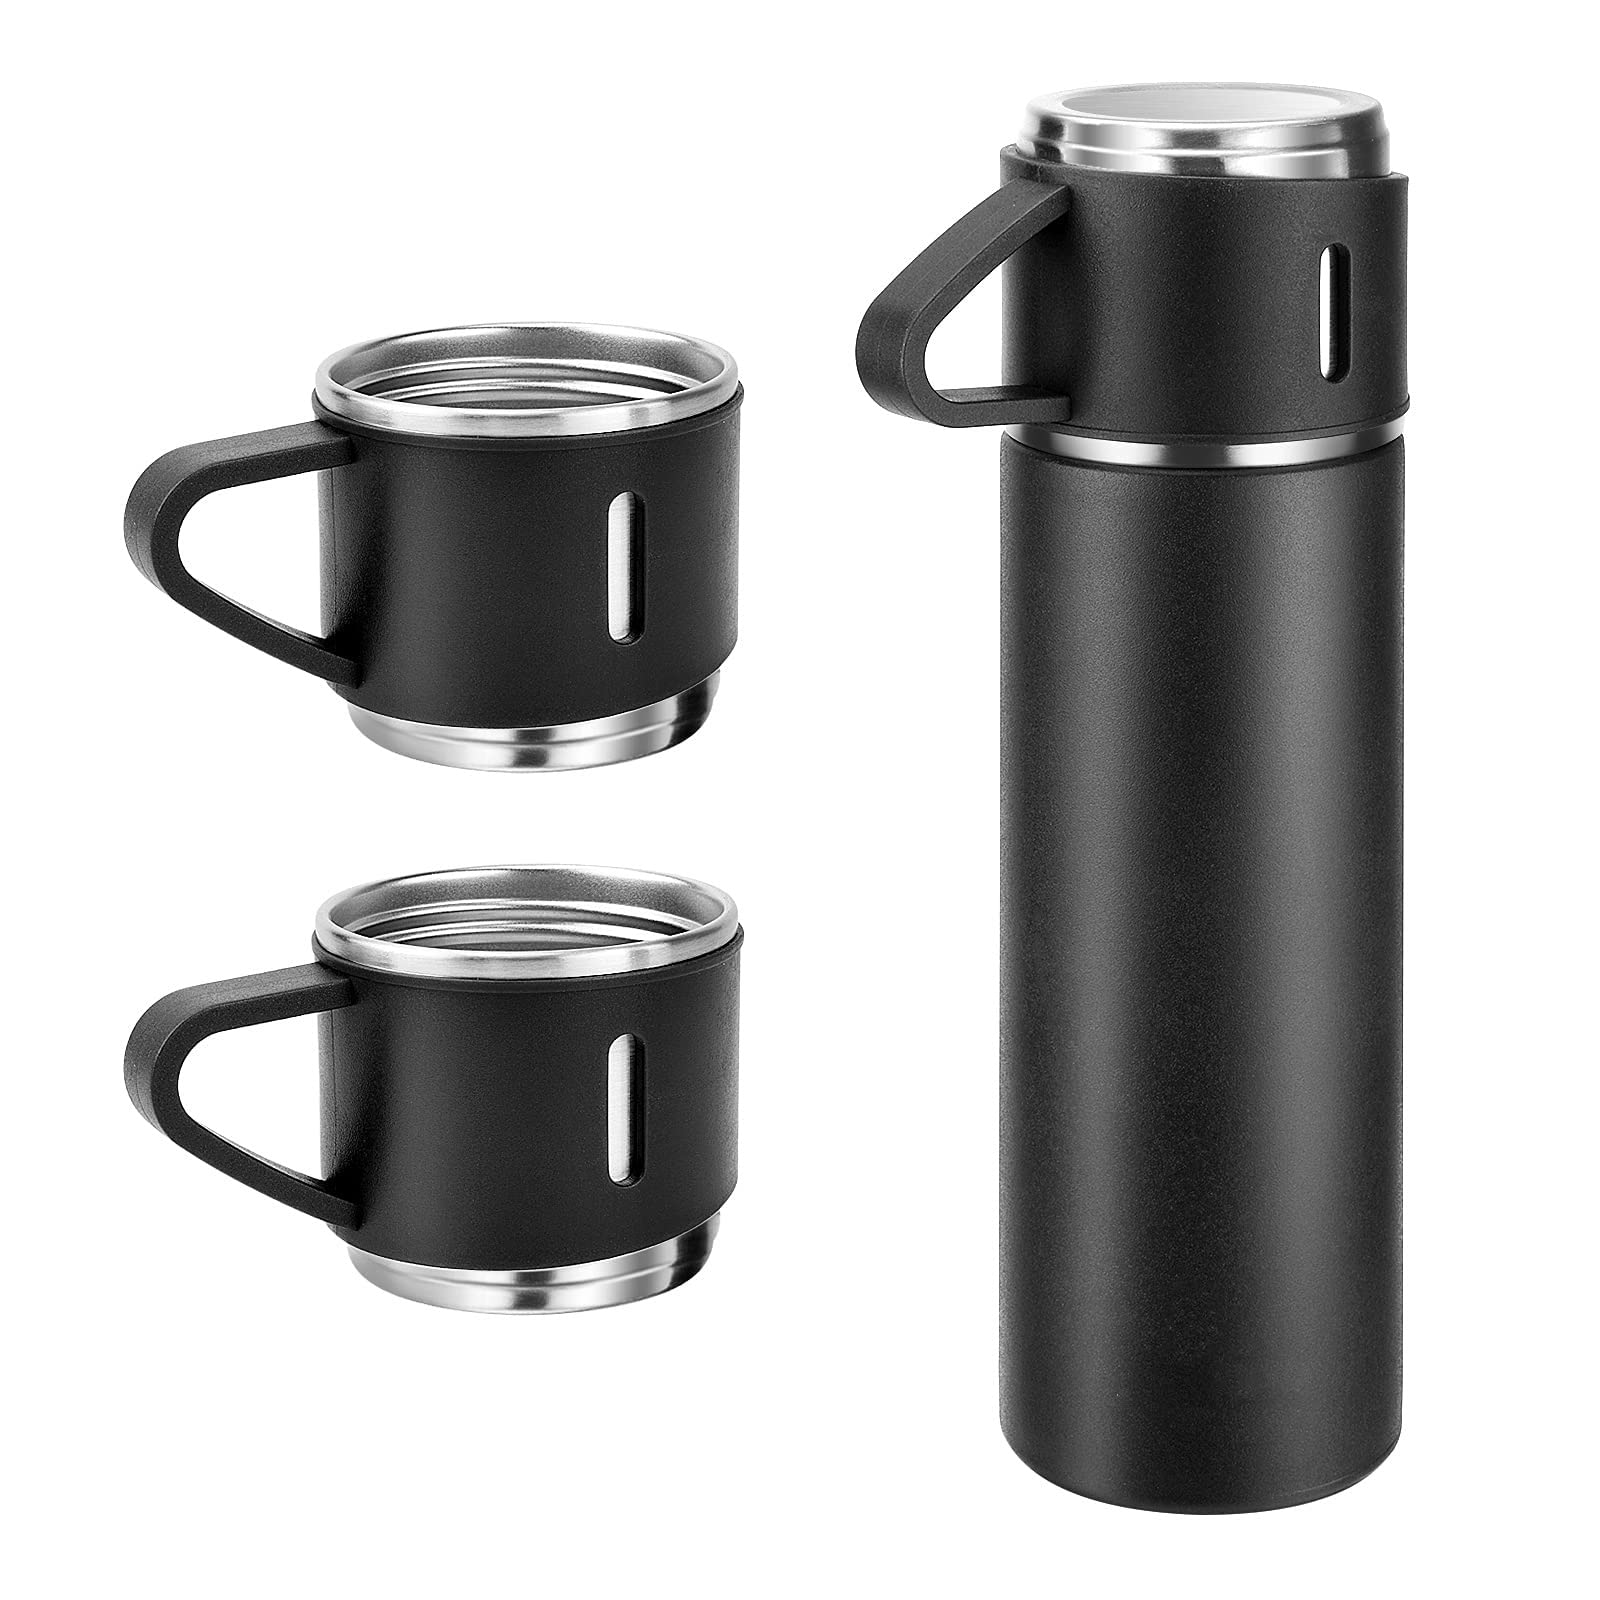 Coffee Thermos Stainless Steel Vacuum-Insulated Water Bottle, 500ml/16.9oz Insulated Bottle with Cup for Hot & Cold Drink Travel Mug (Black, Three Cup)